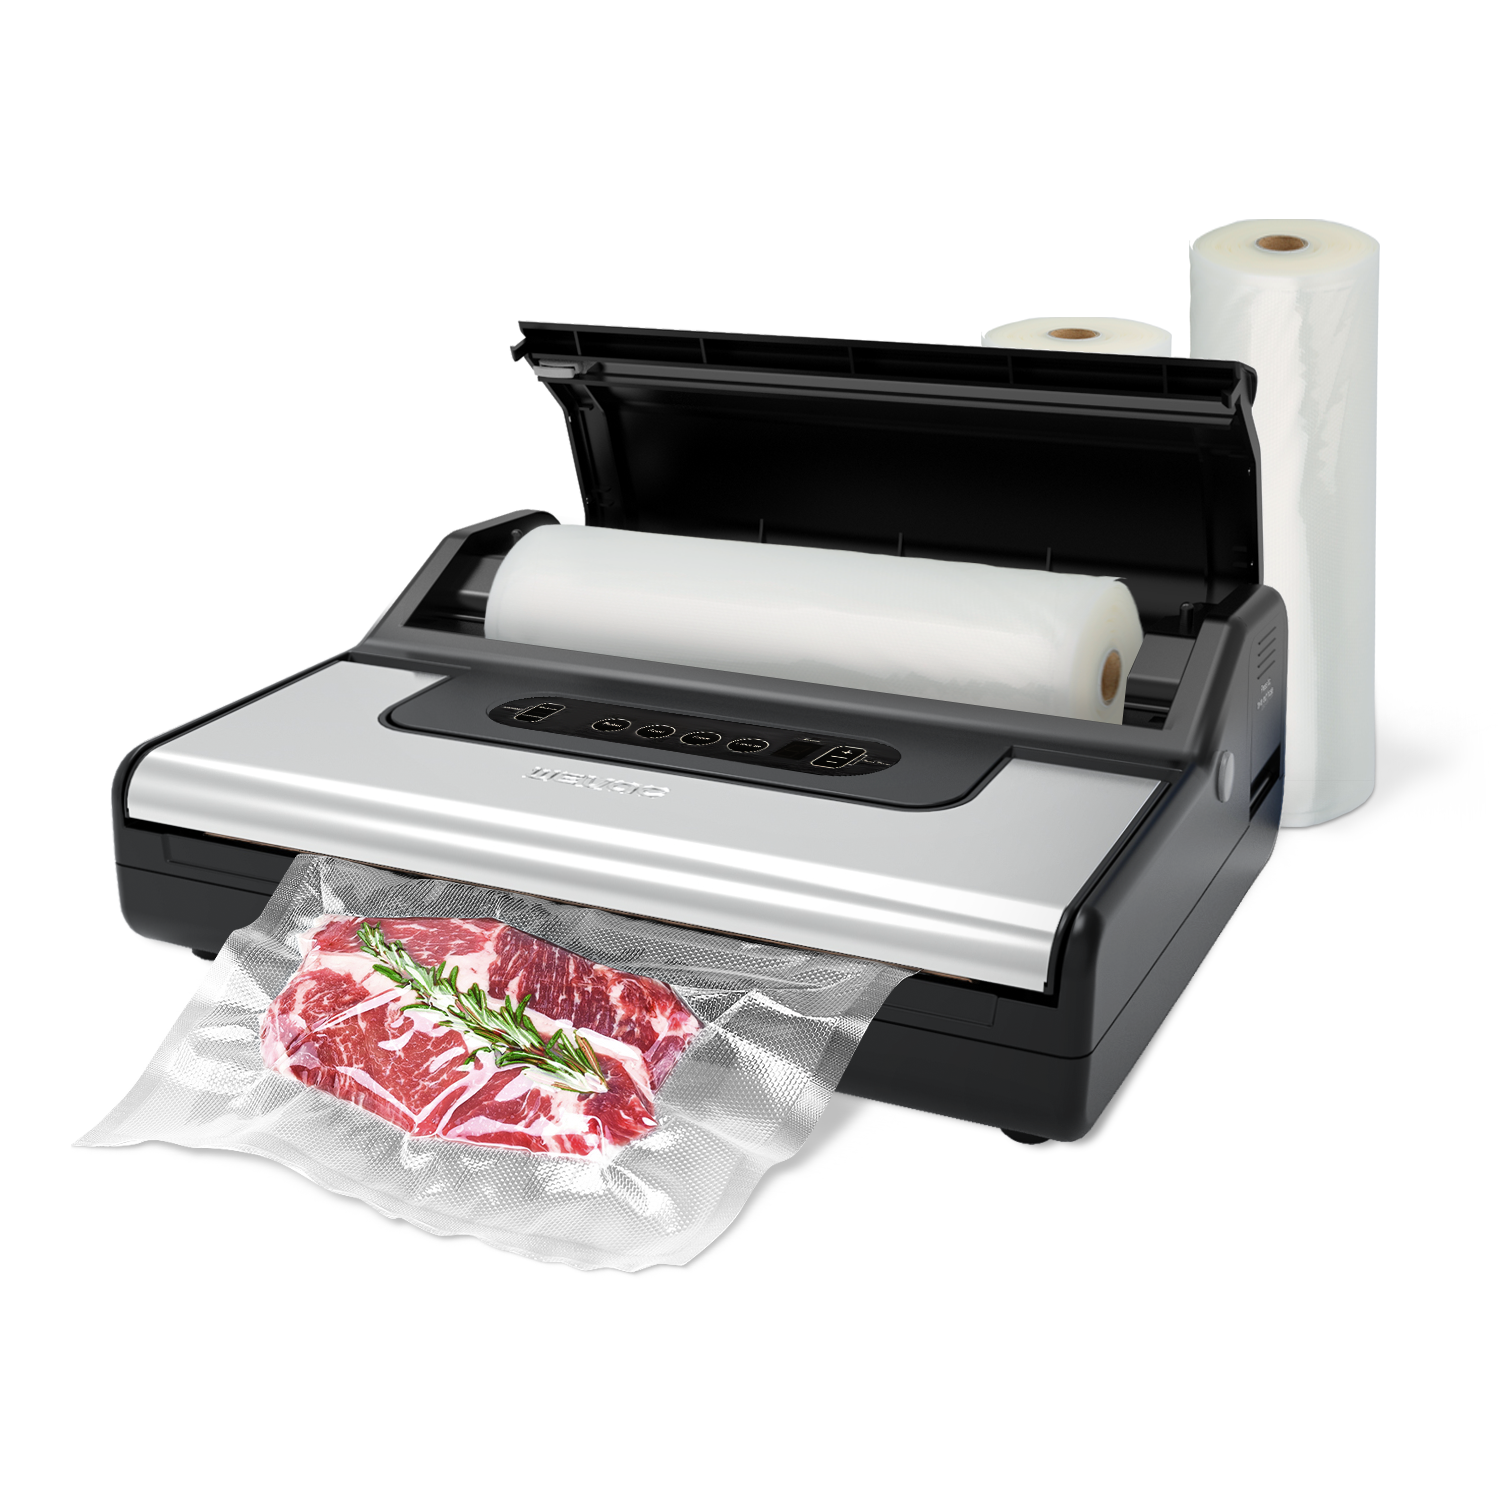 Wevac 12 inch Chamber Vacuum Sealer, CV12, ideal for liquid or juicy food  including Fresh Meats, Soups, Sauces and Marinades. Compact design, Heavy  duty, Professional sealing width, Commercial machine - Yahoo Shopping